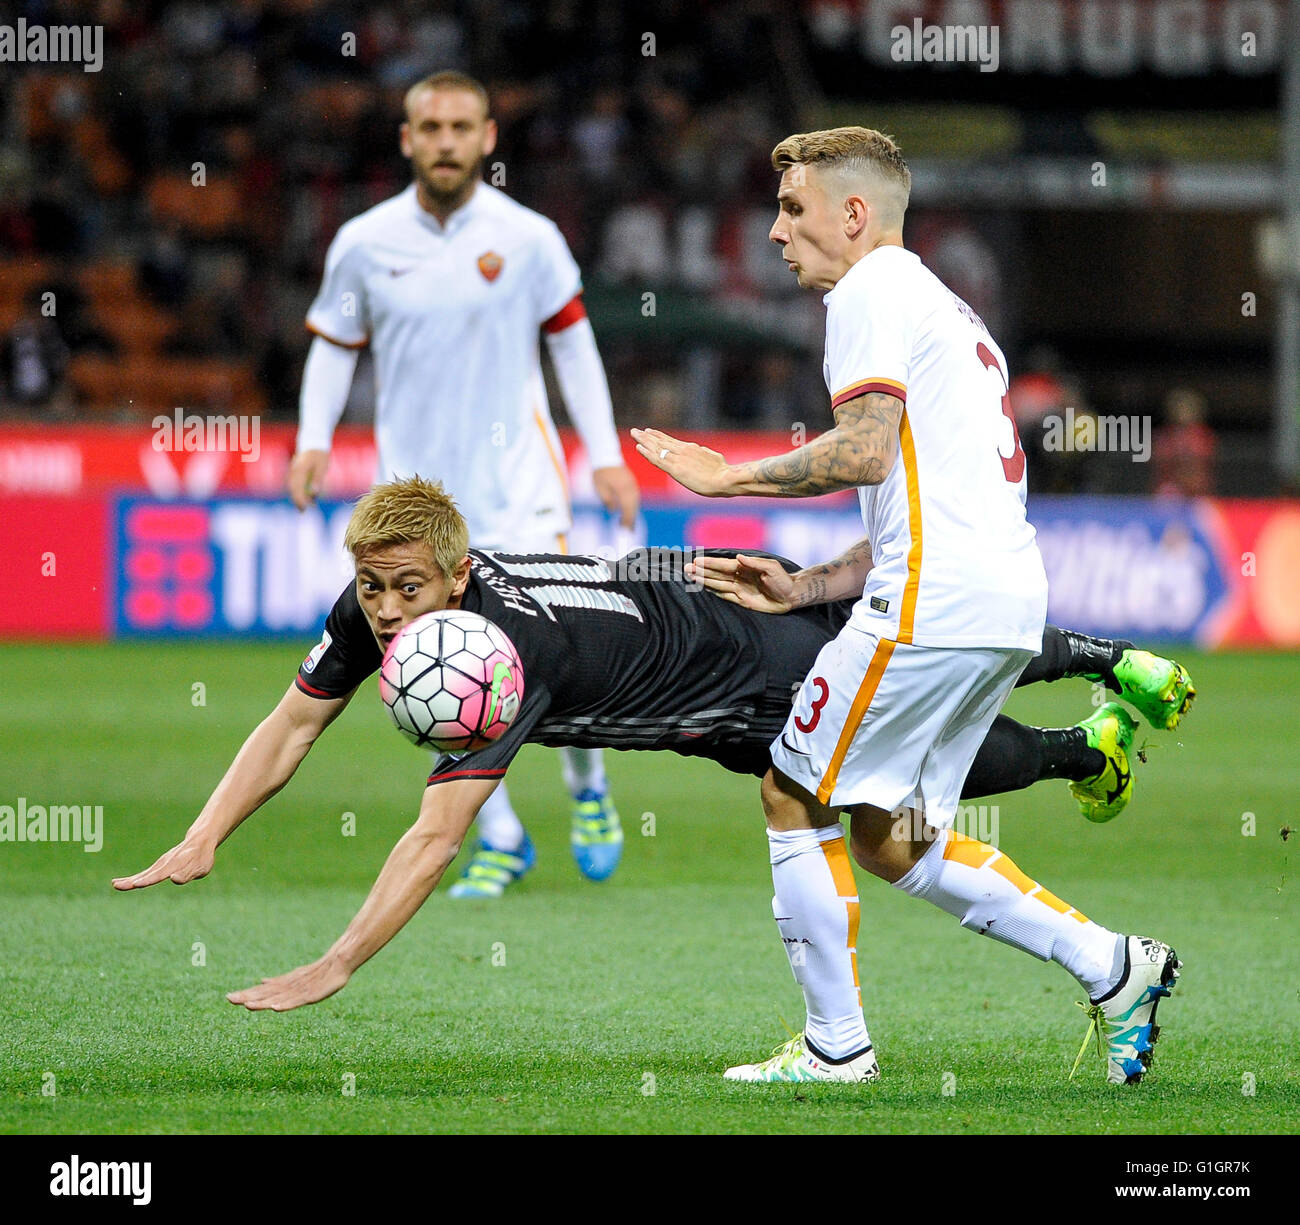 Milan, Italy. 14 may, 2016: Keisuke Honda (left) and Lucas Digne compete for the ball during the Serie A football match between AC Milan and AS Roma. Credit:  Nicolò Campo/Alamy Live News Stock Photo